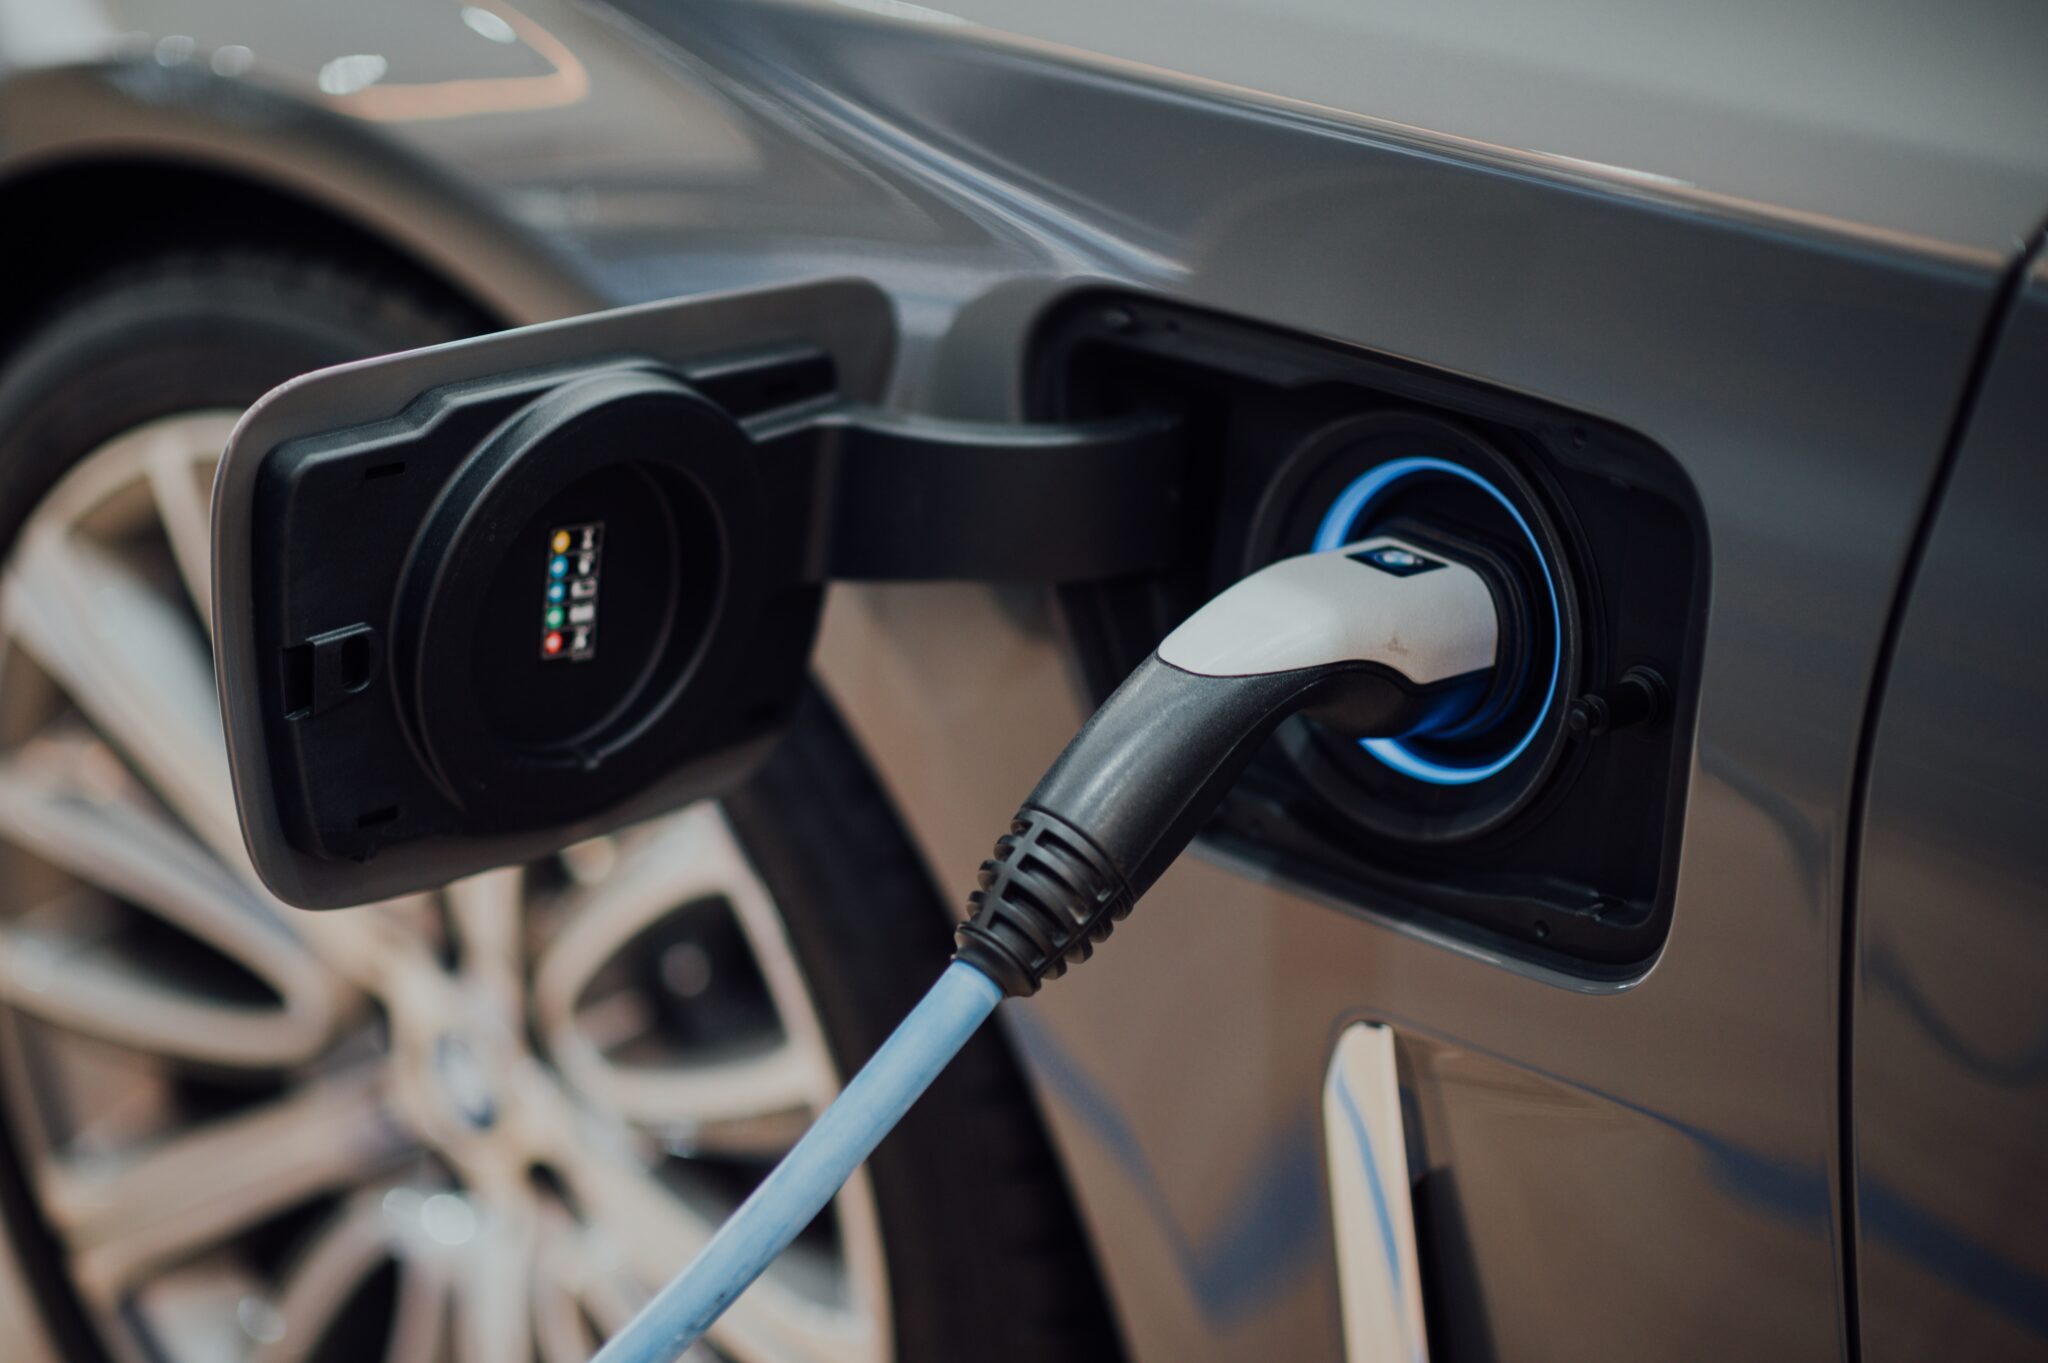 7 Cool Features of an Electric Vehicle You Didn’t Know About